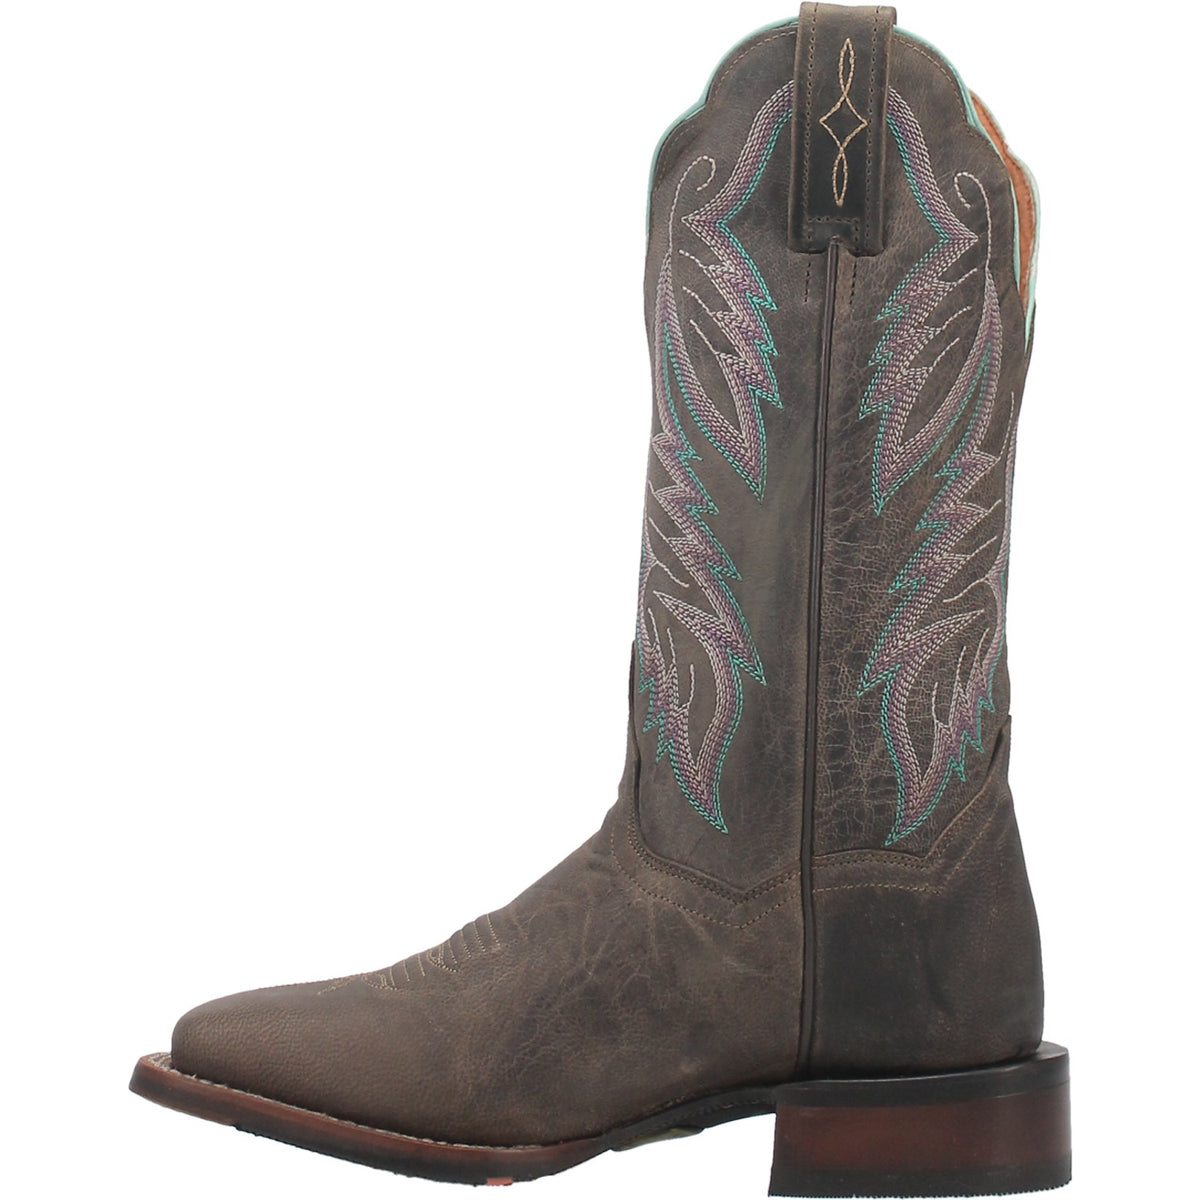 KENDALL LEATHER BOOT Cover